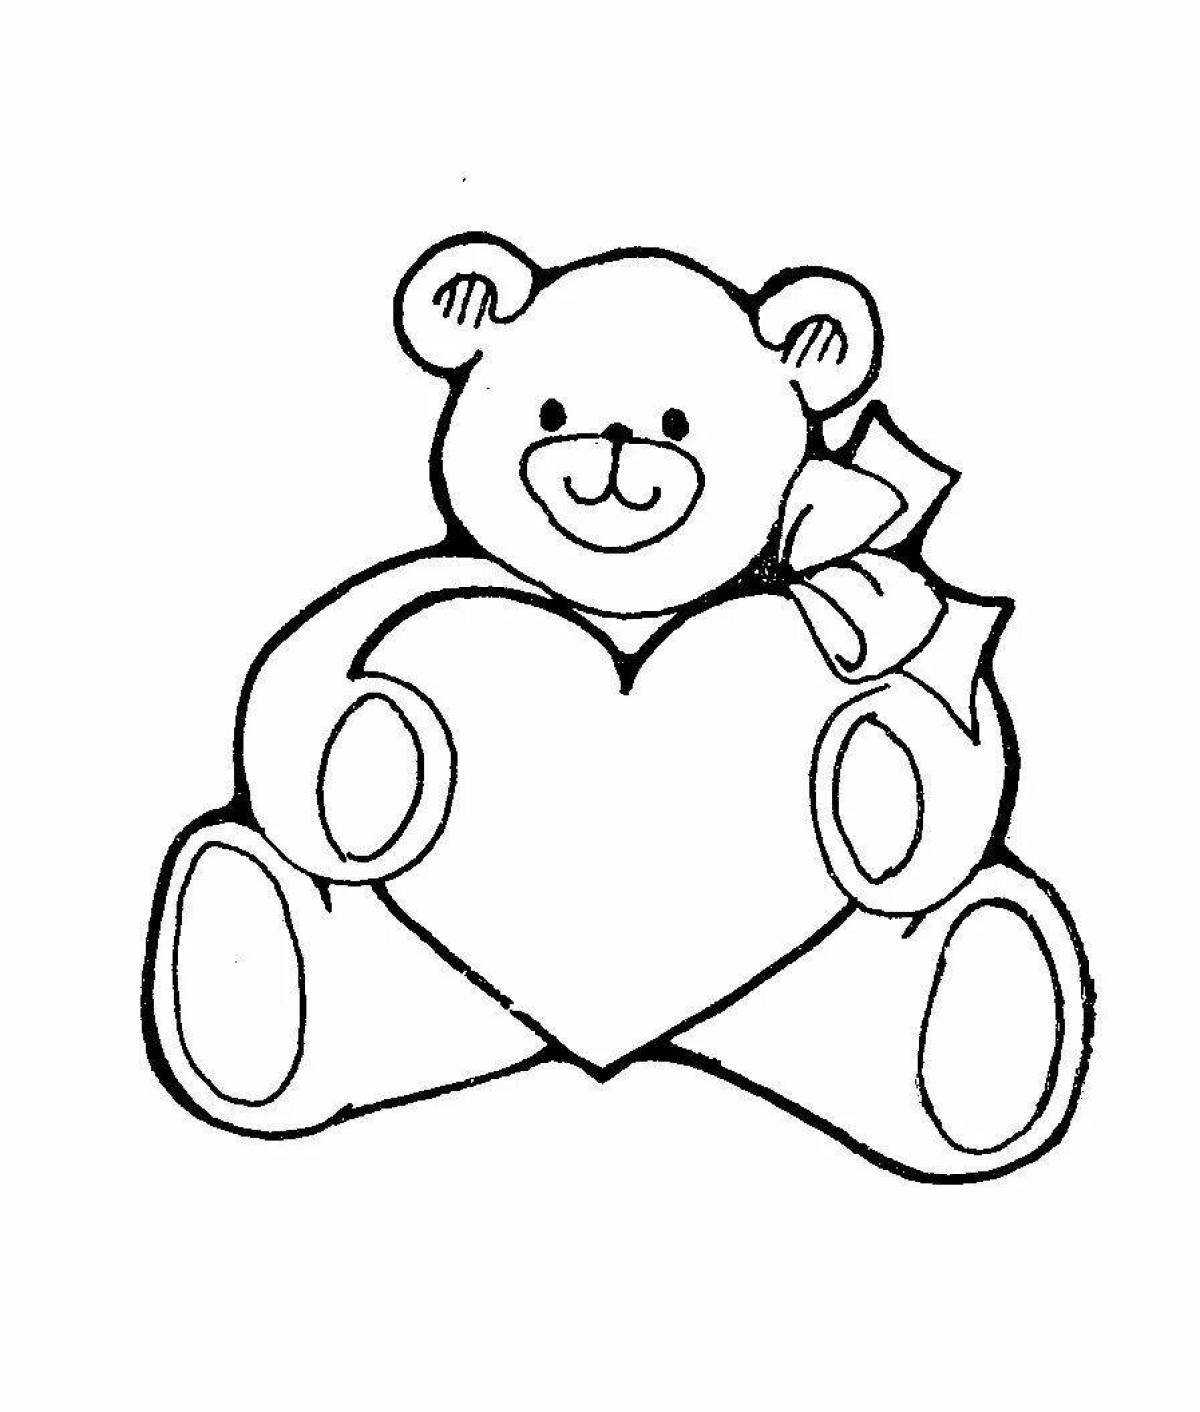 Teddy bear with heart coloring book